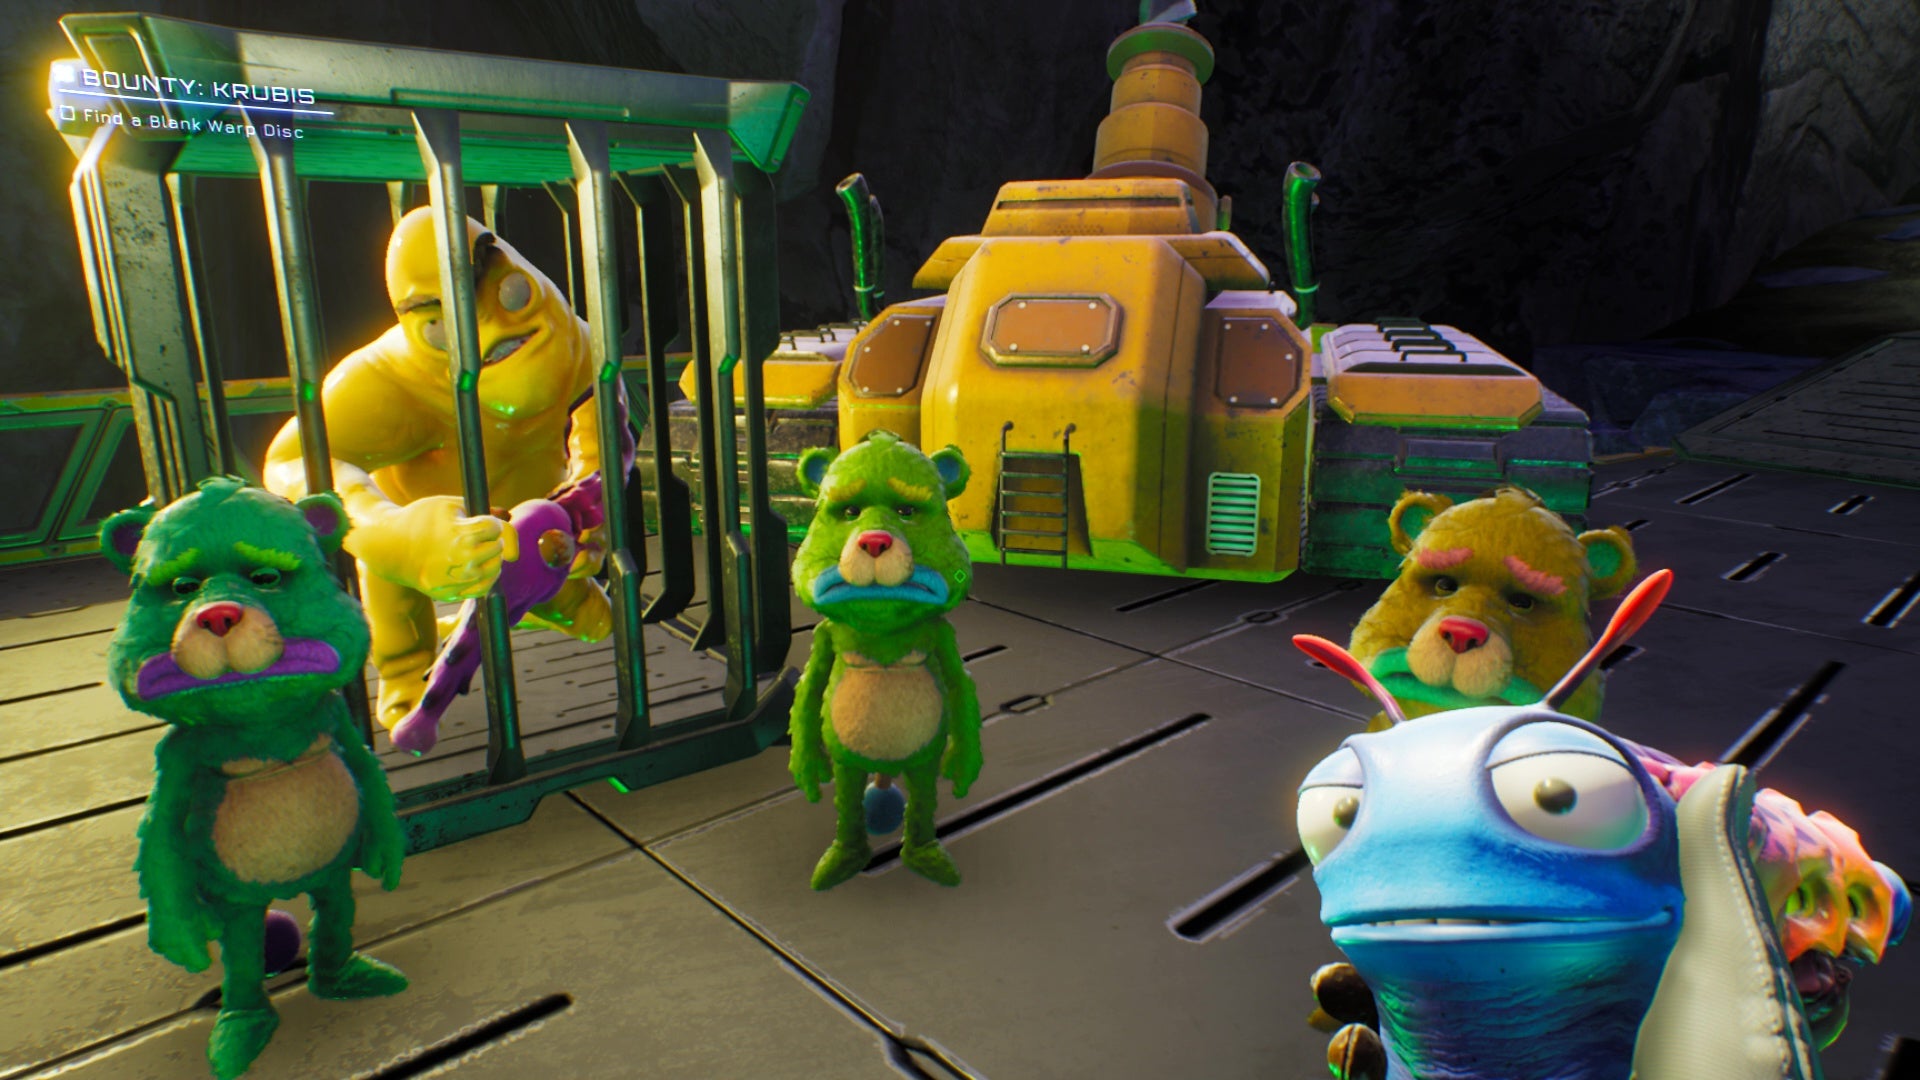 The player talks to some sad teddy bears who've caged a yellow alien in High On Life.